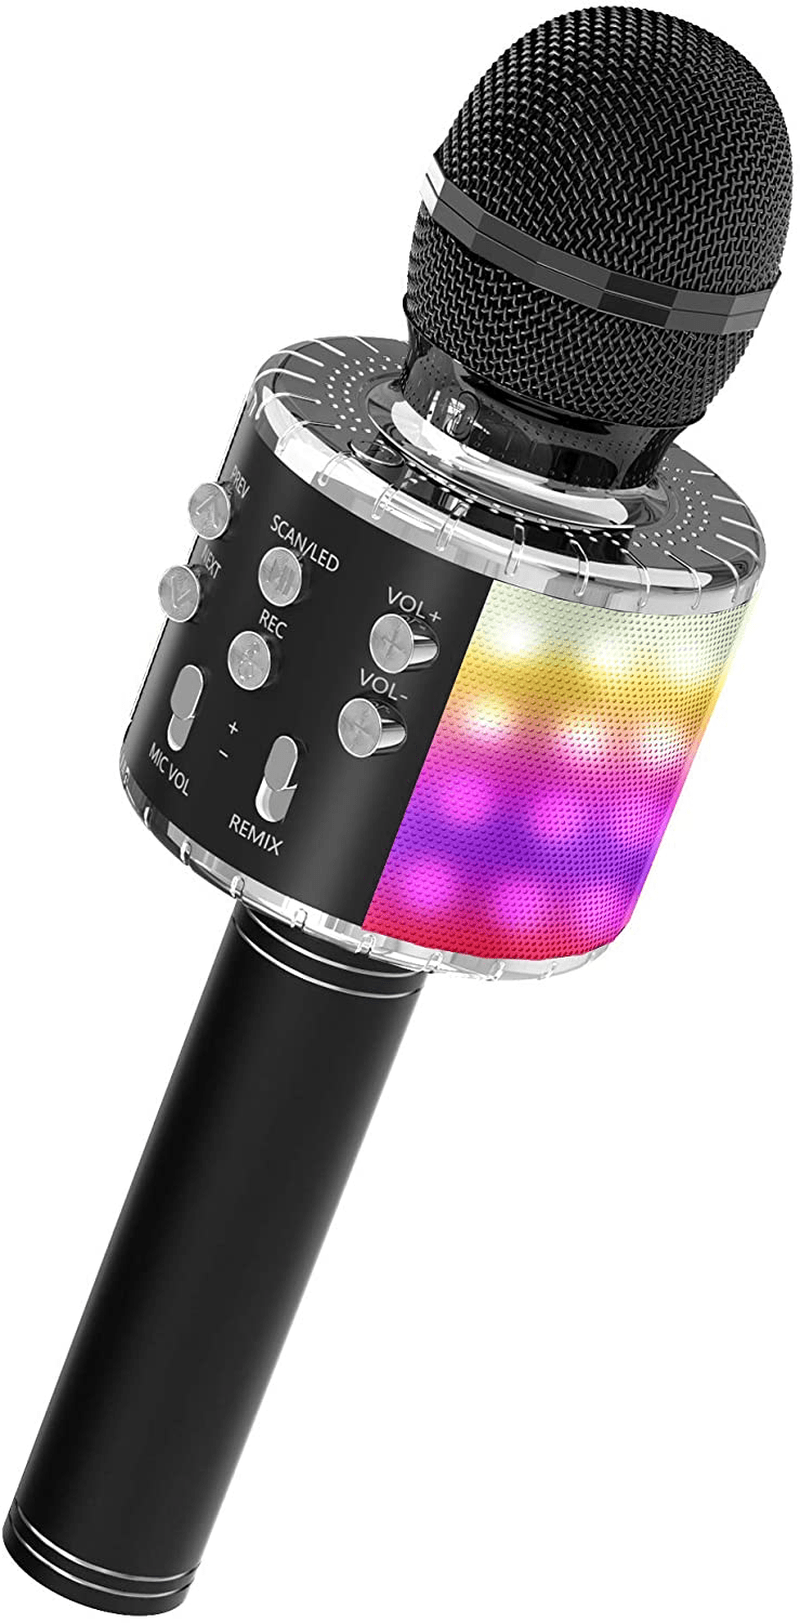 OVELLIC Karaoke Microphone for Kids, Wireless Bluetooth Karaoke Microphone with LED Lights, Portable Handheld Mic Speaker Machine, Great Gifts Toys for Girls Boys Adults All Age (Rose Gold)